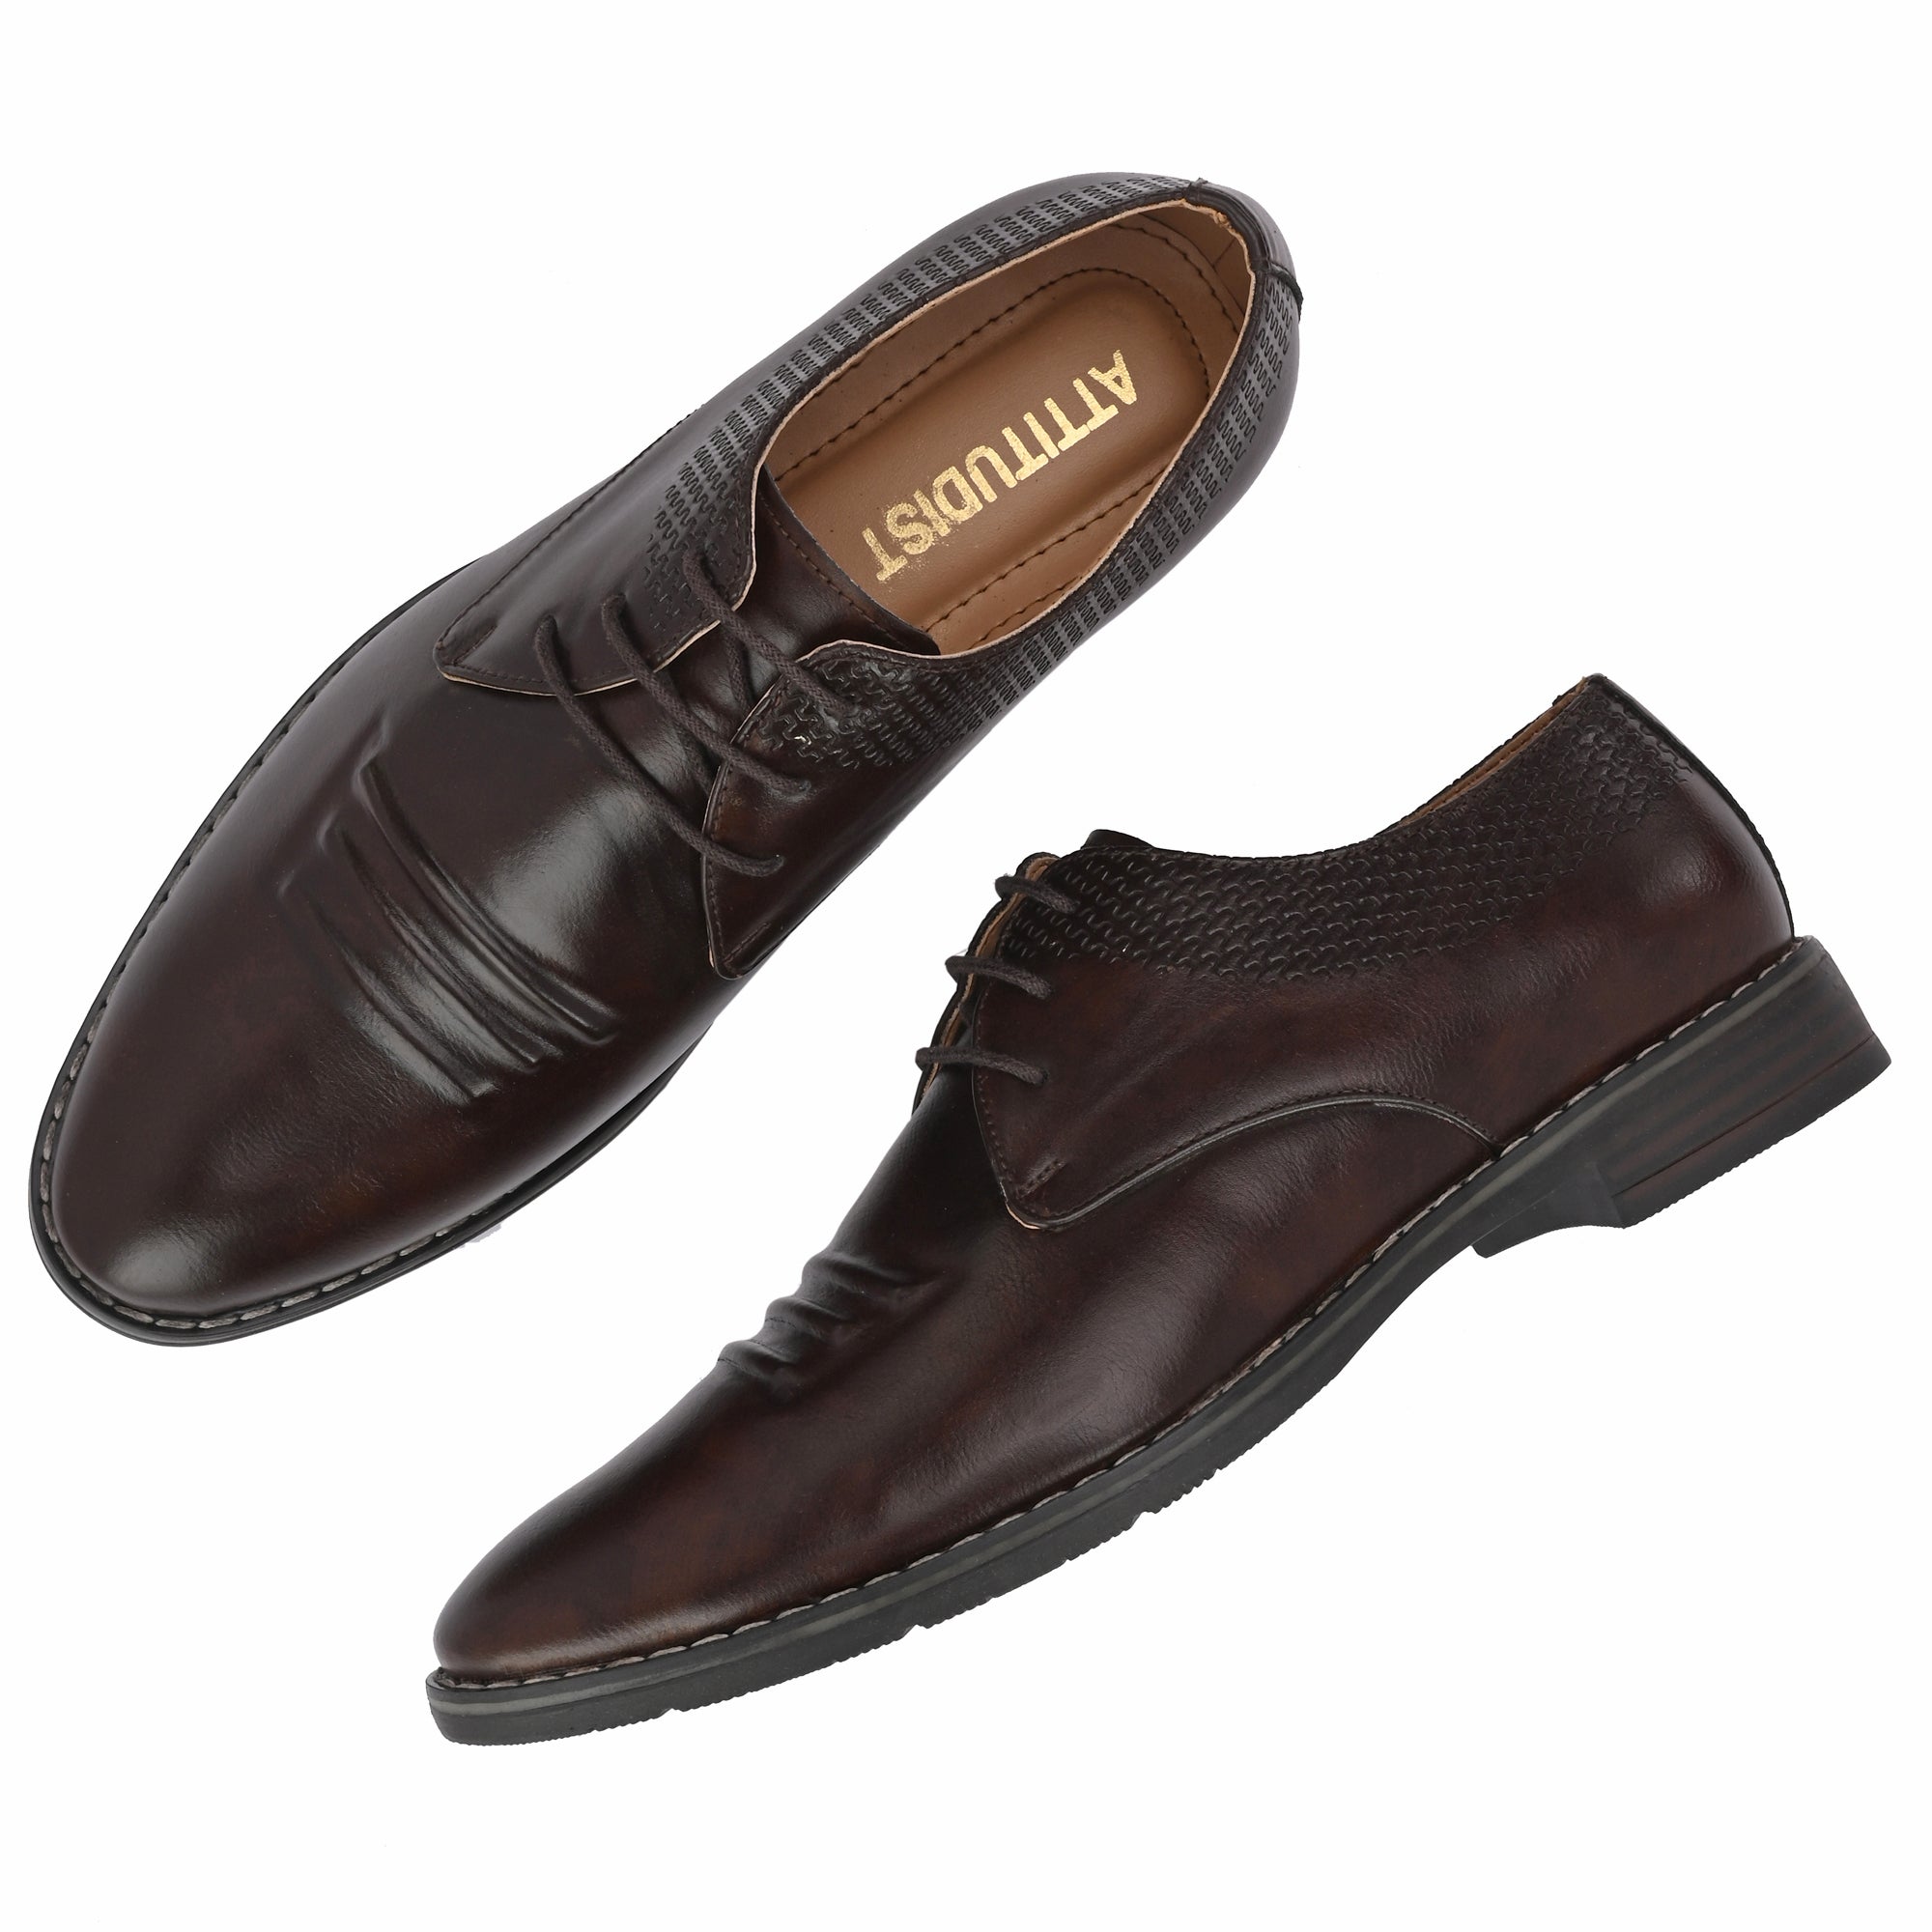 formal-lace-up-attitudist-shoes-for-men-with-design-3703brown